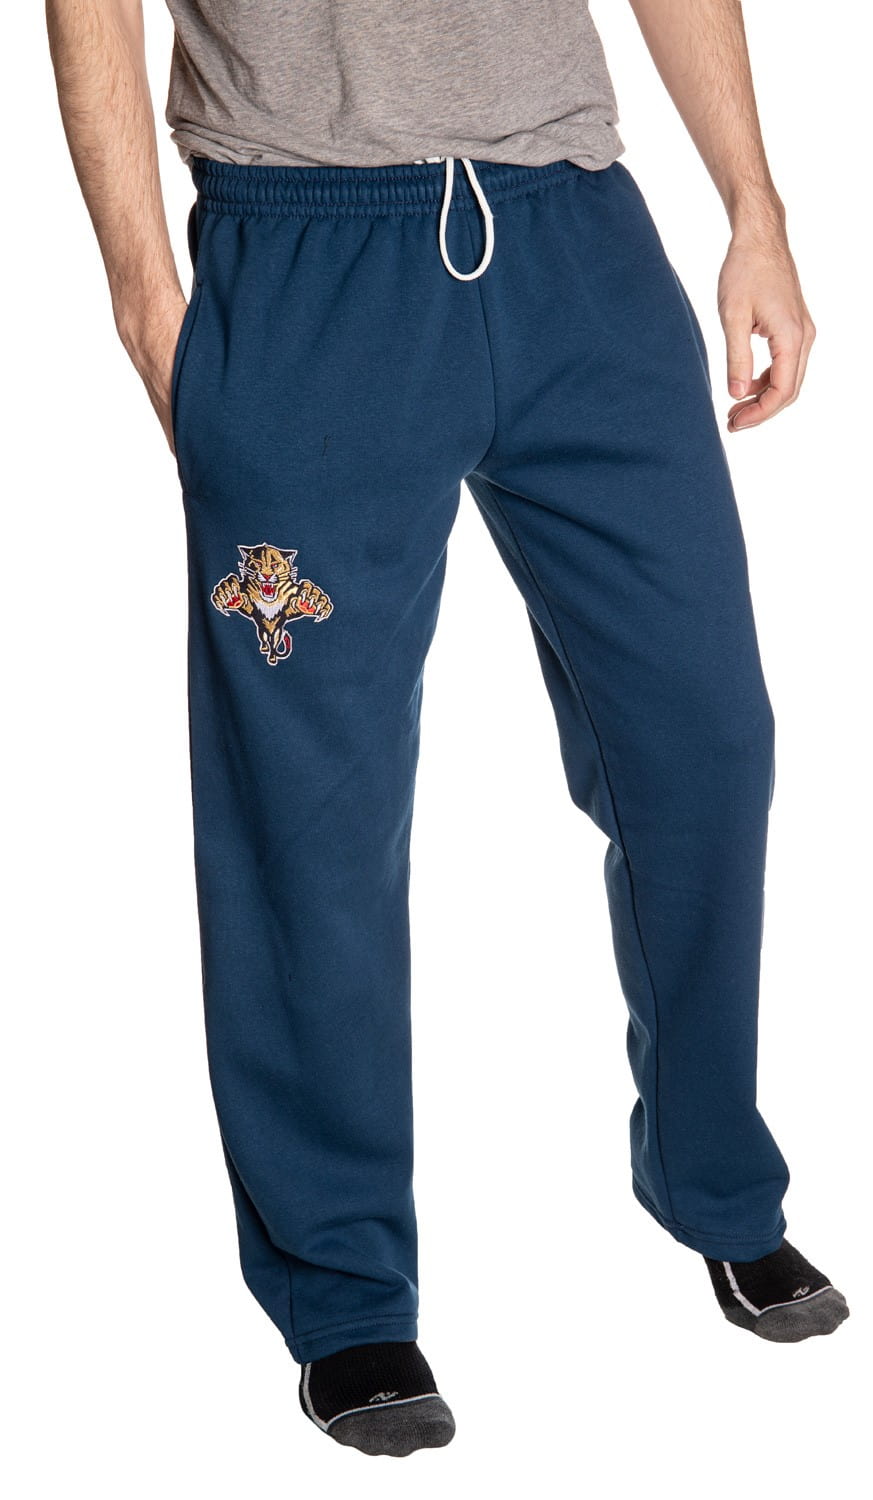 Florida Panthers Blue Sweatpants Front View